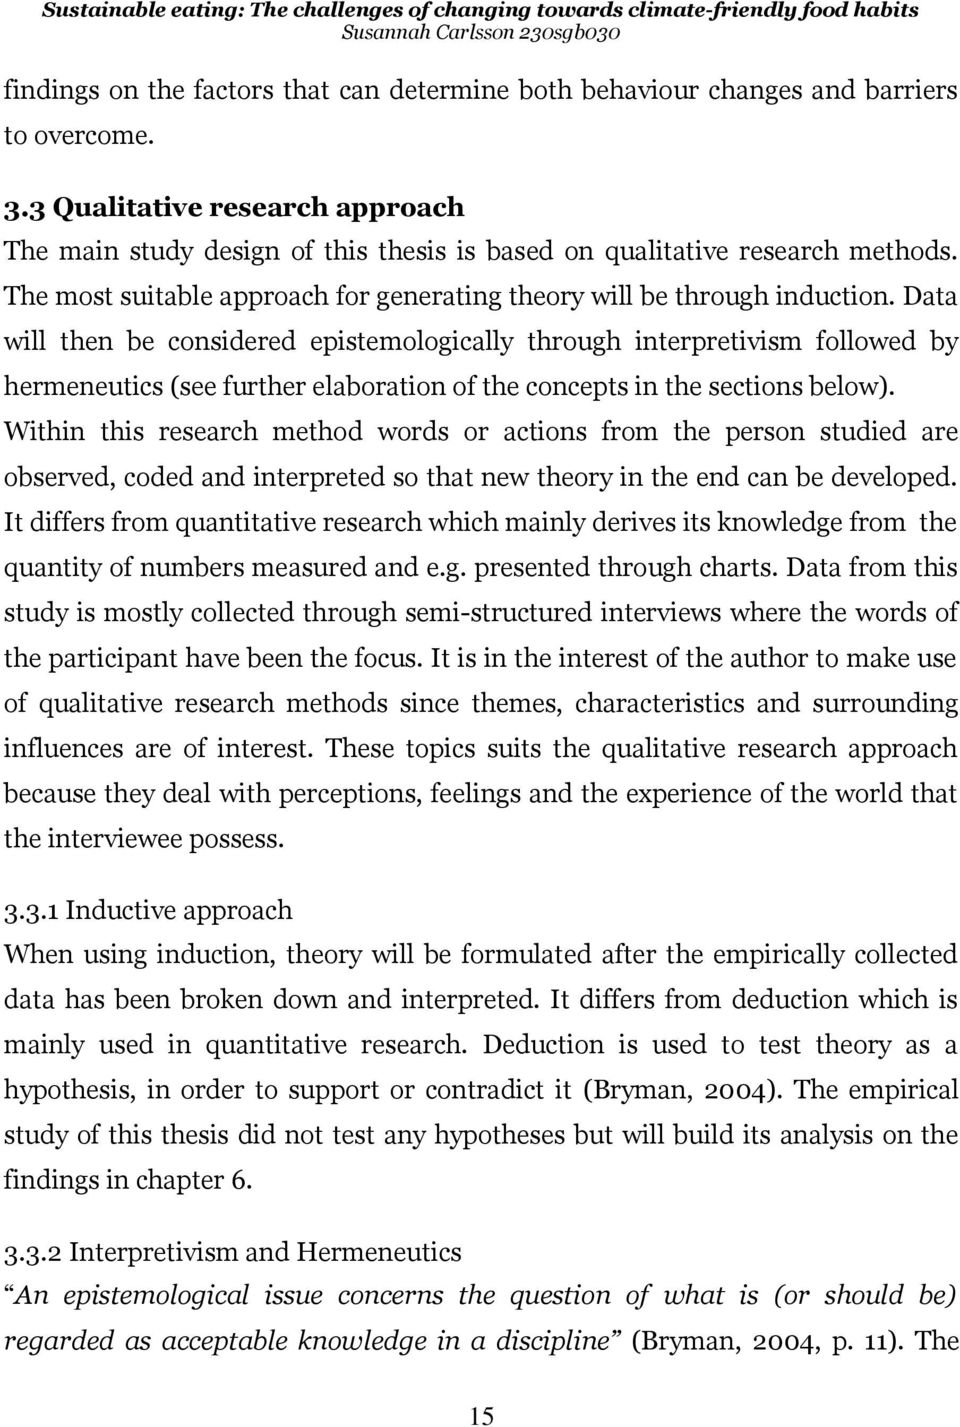 Data will then be considered epistemologically through interpretivism followed by hermeneutics (see further elaboration of the concepts in the sections below).